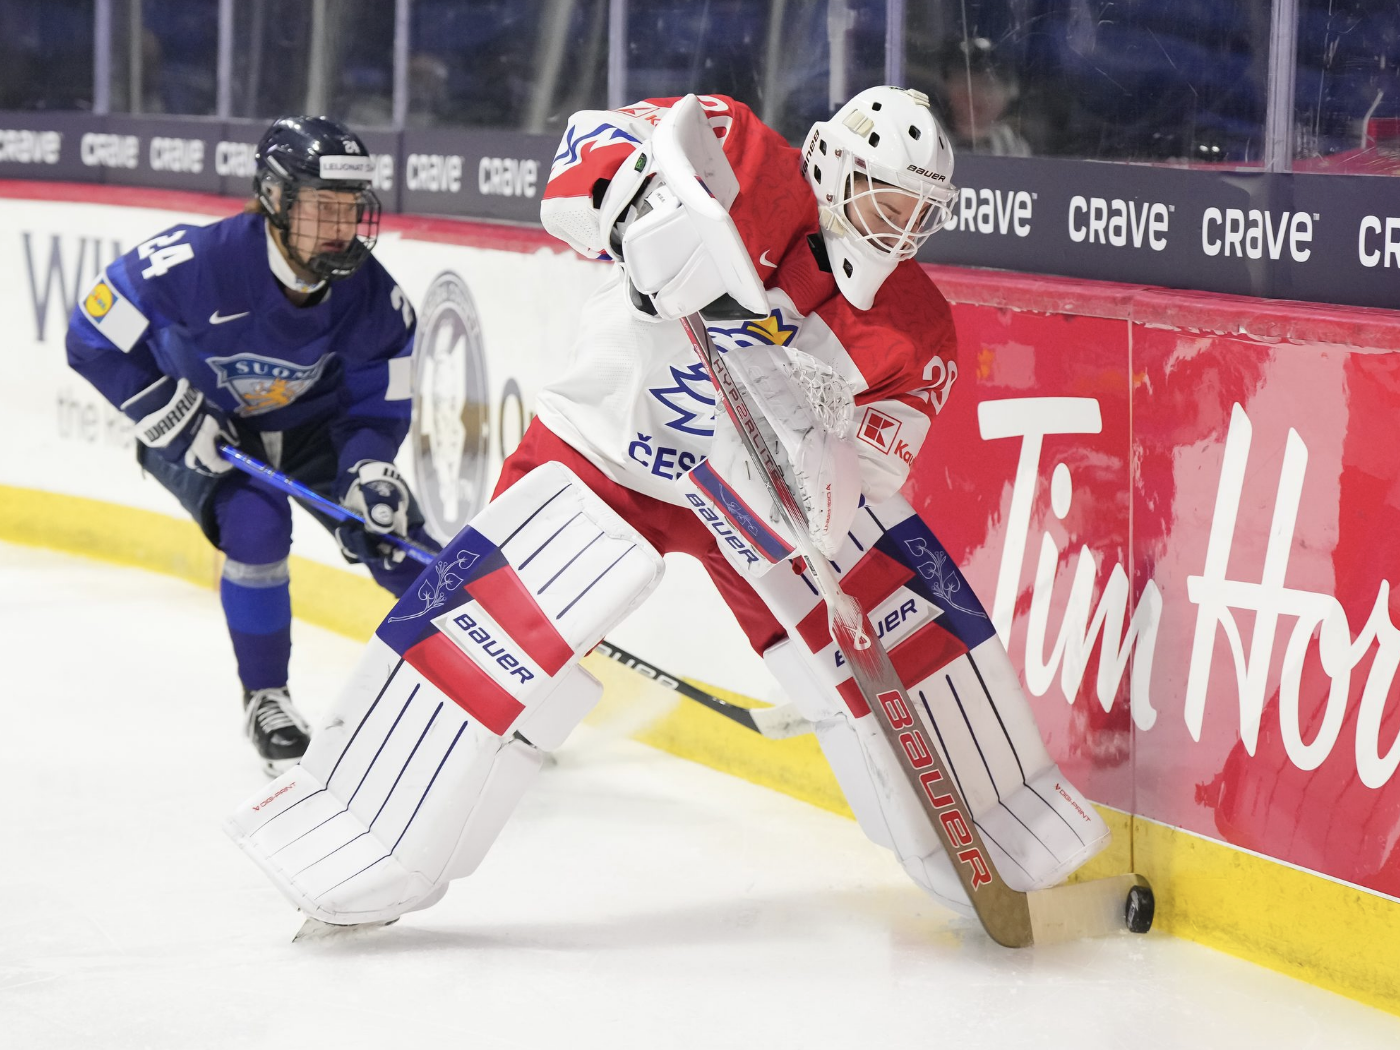 Klára Peslarová makes a play on the puck behind her net. There is a Finnish defender in pursuit. Peslarová is wearing a white uniform with red shoulders, while the Finnish defender is wearing a navy blue uniform.